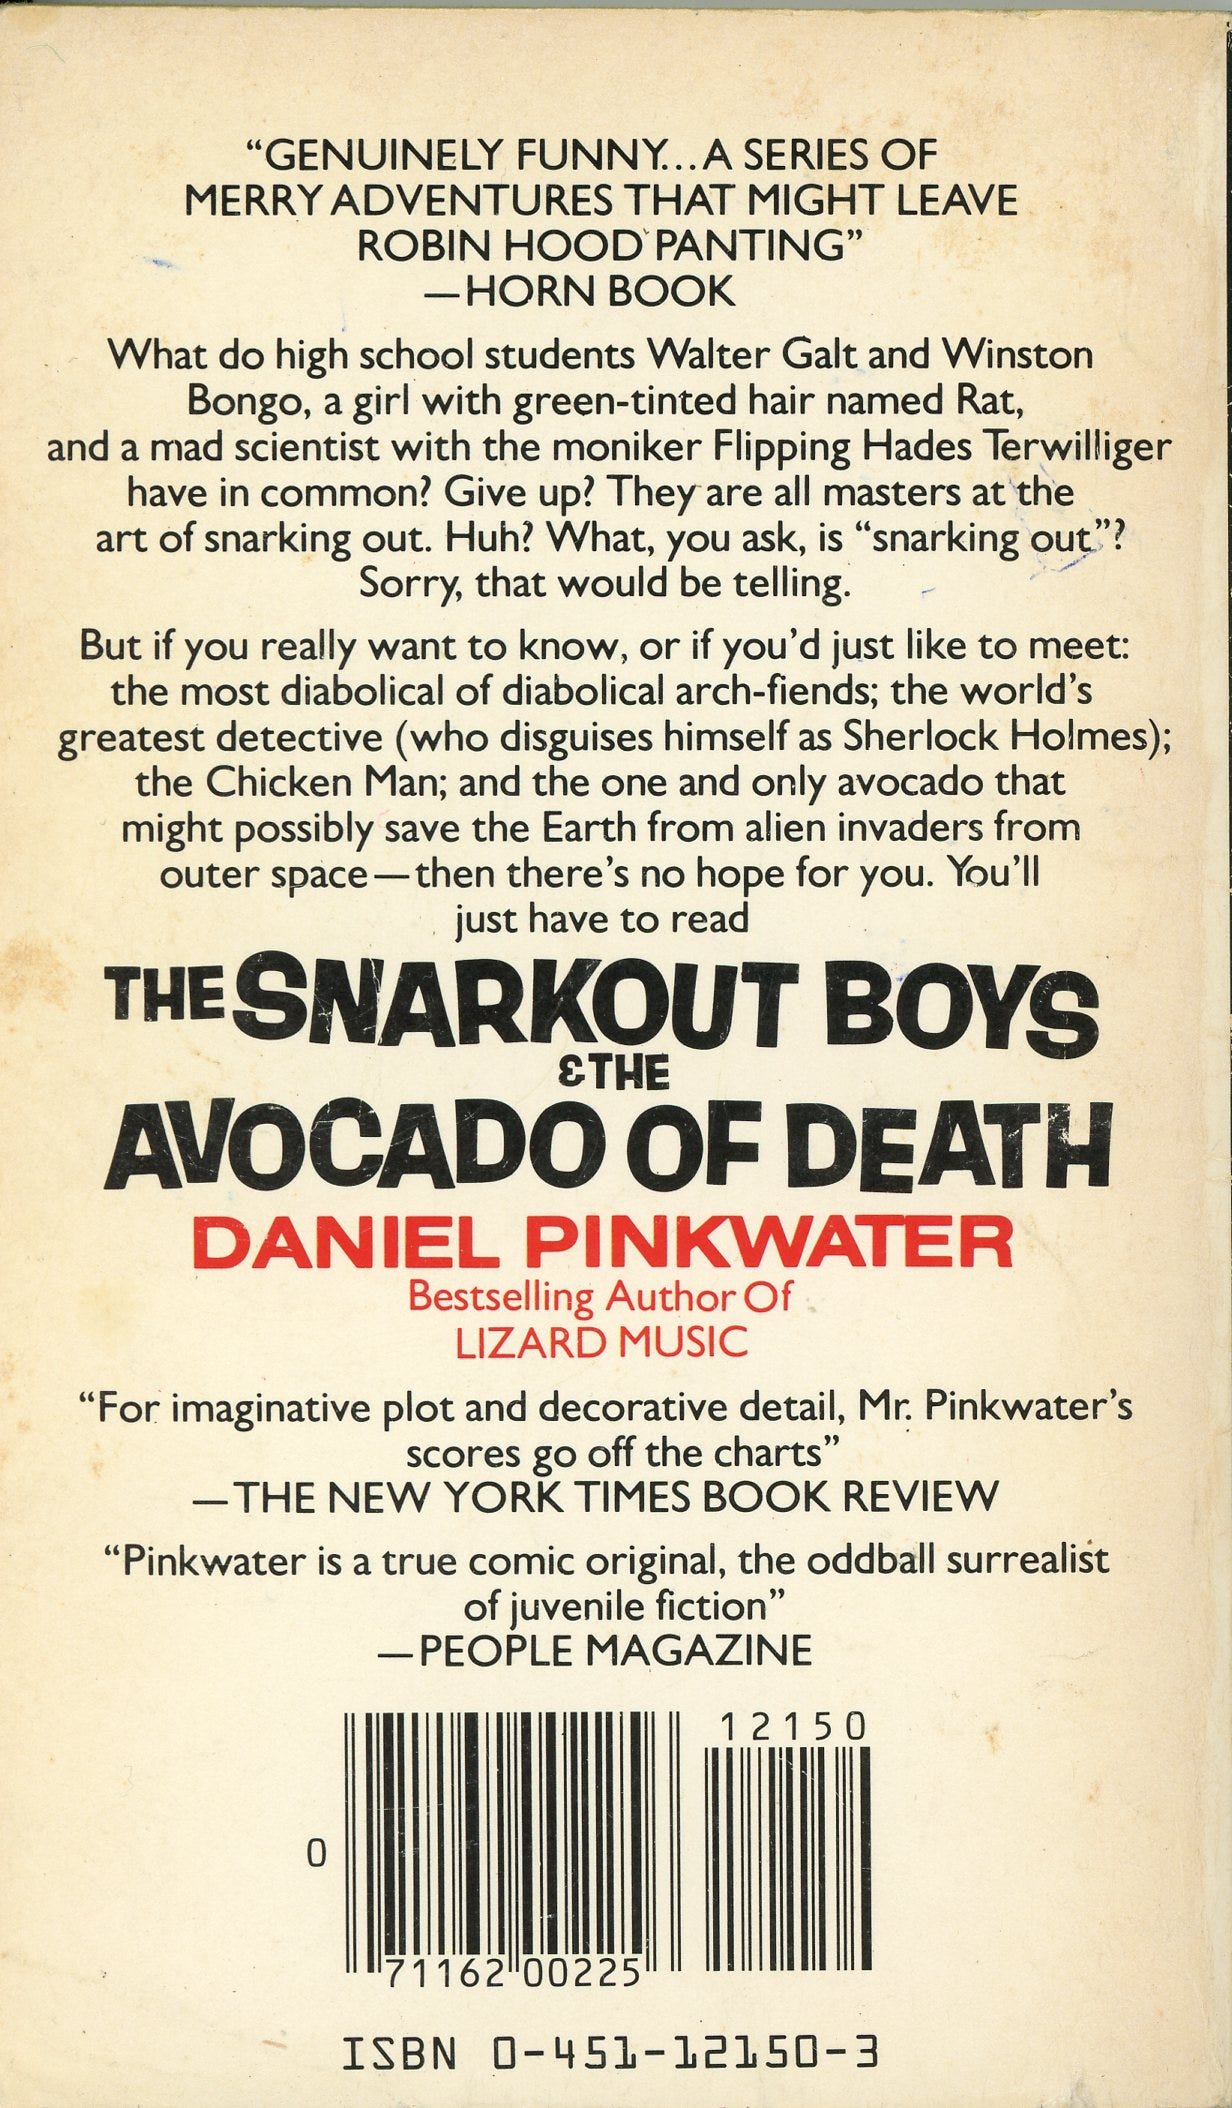 Back cover of The Snarkout Boys and the Avocado of Death by Daniel Pinkwater